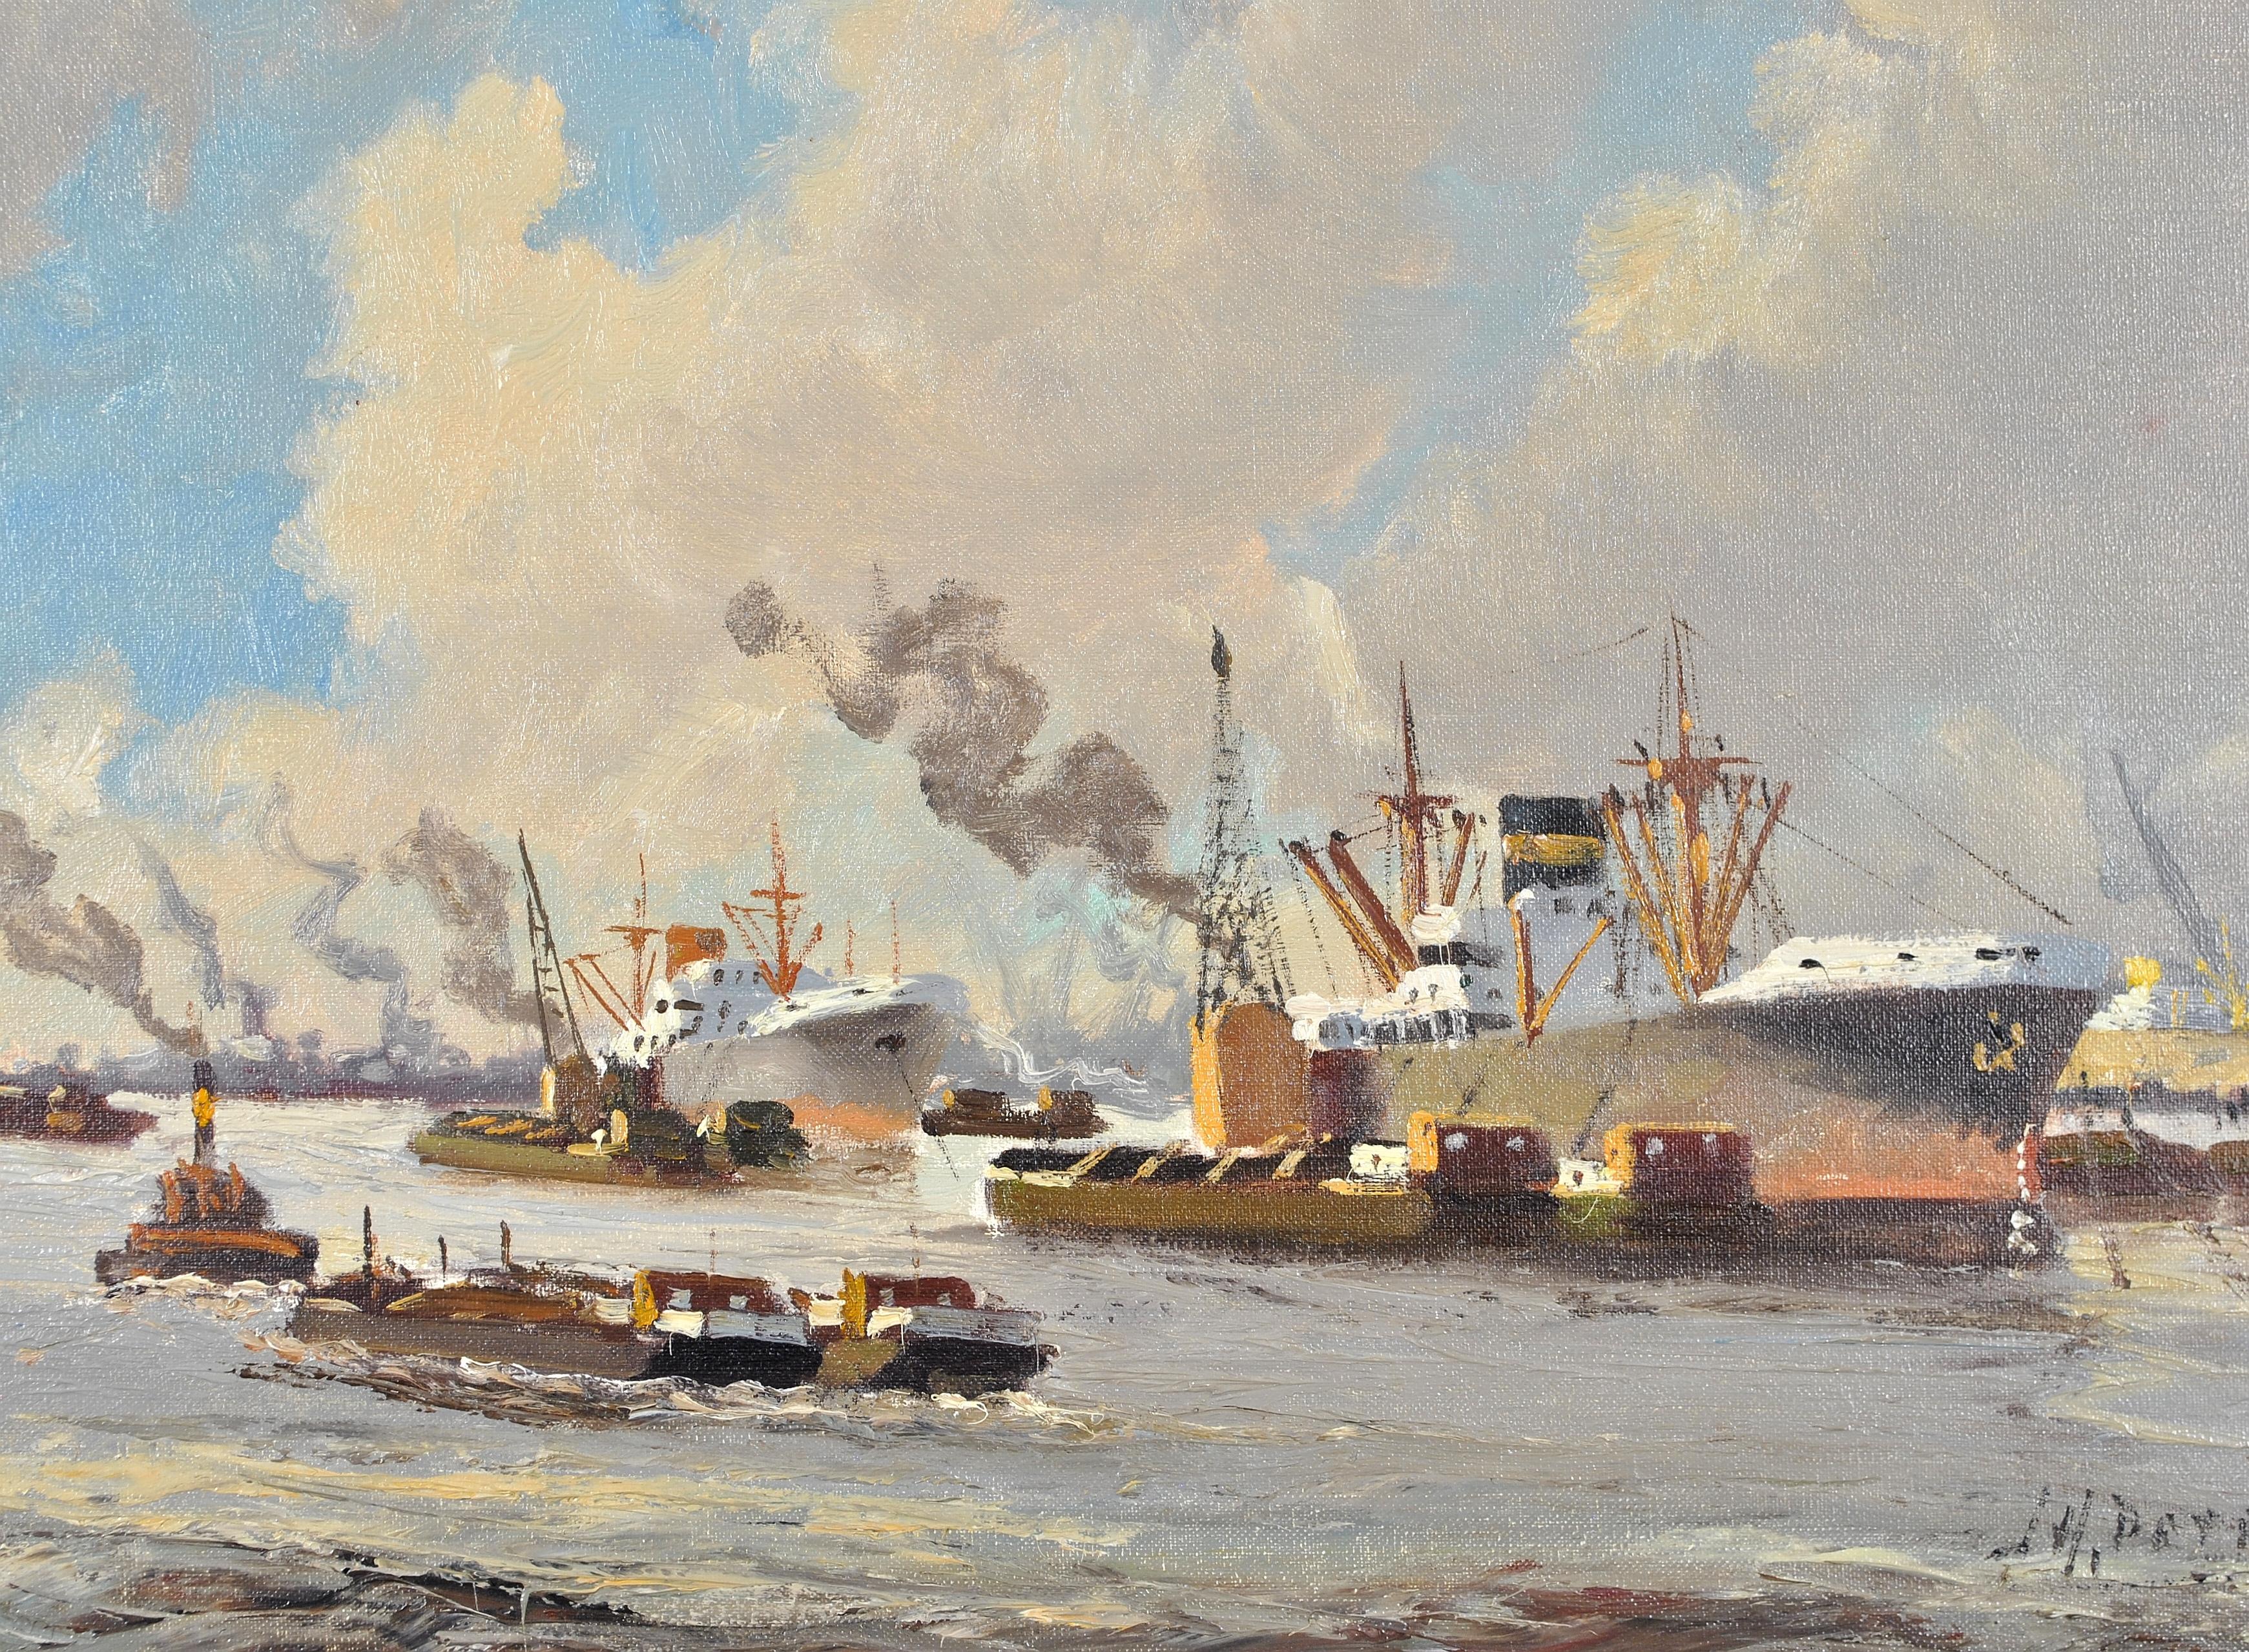 A lovely mid 20th century Danish oil on canvas depicting a busy coastal shipping scene with numerous vessels. 

The work is signed lower right and again on the reverse. Presented in a gilt frame.

Artist: Danish School, 20th century
Title: Shipping